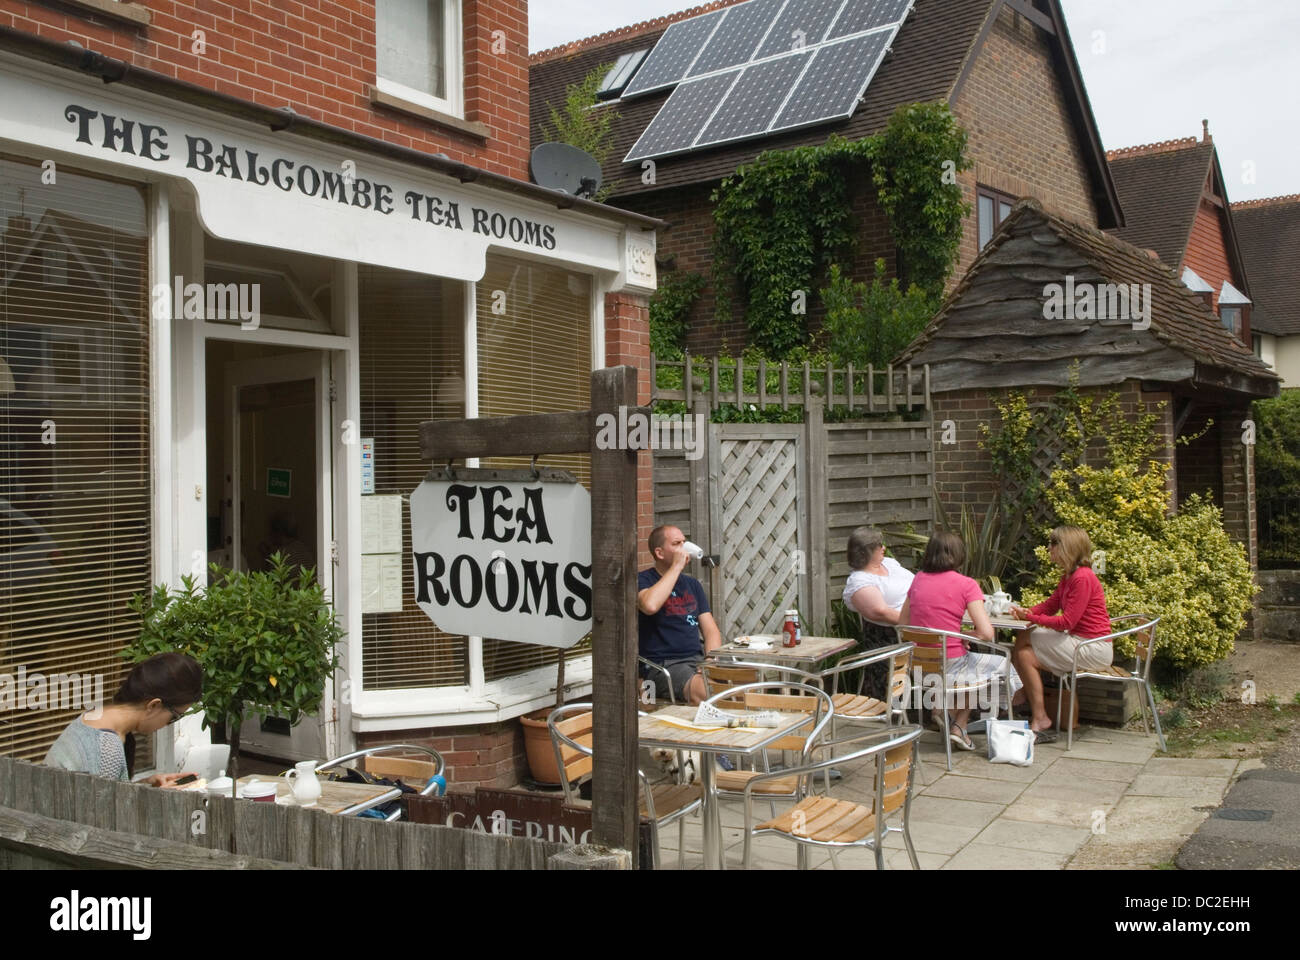 Balcombe West Sussex UK. The Balcombe Tea Rooms, local residents and tourists. HOMER SYKES Stock Photo